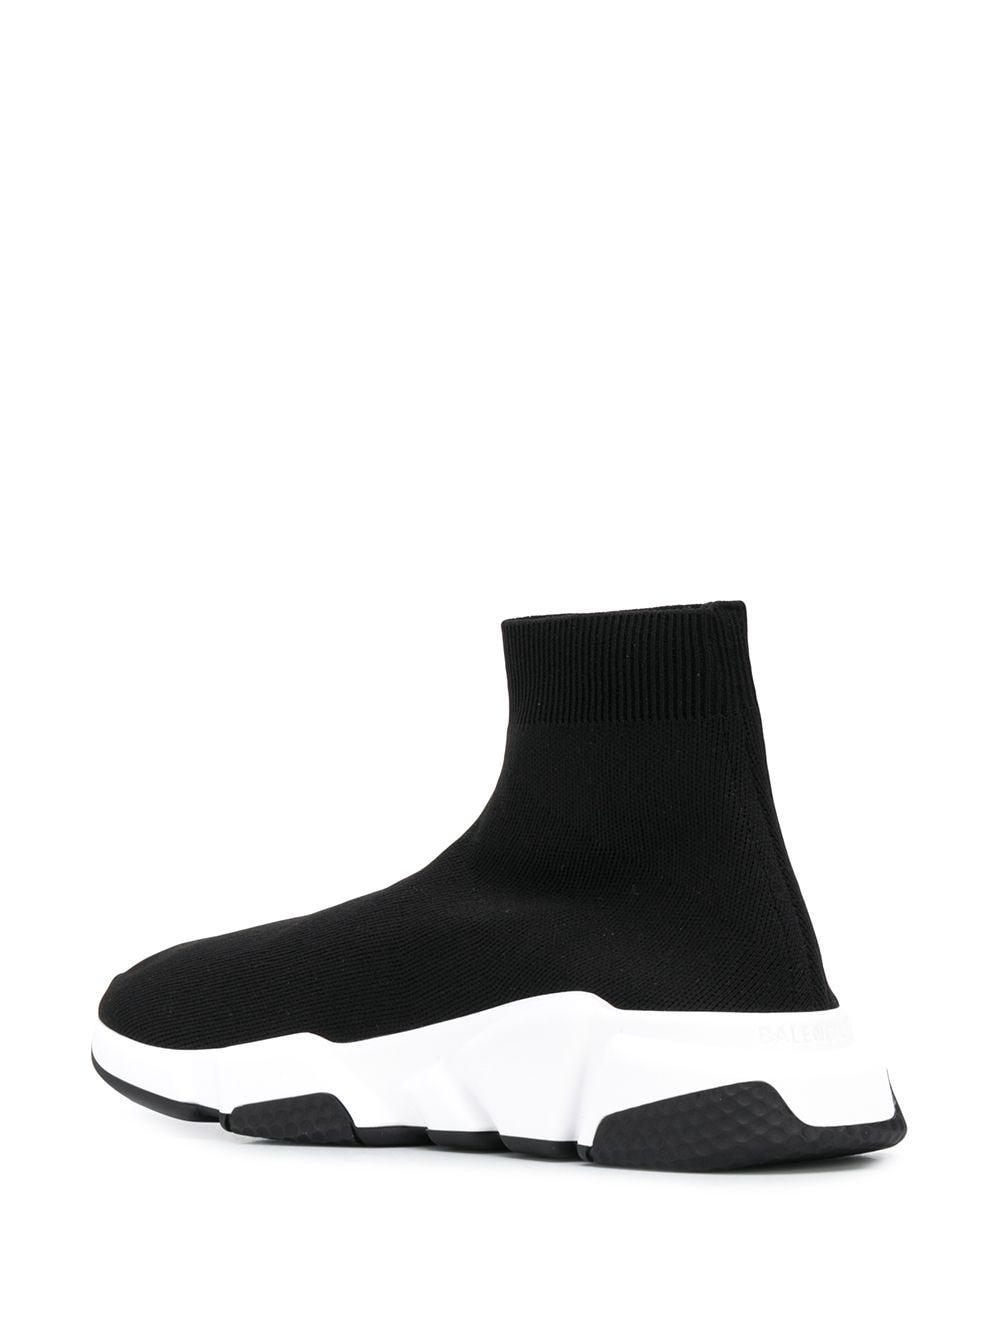 Balenciaga Synthetic Sneakers in Black - Lyst